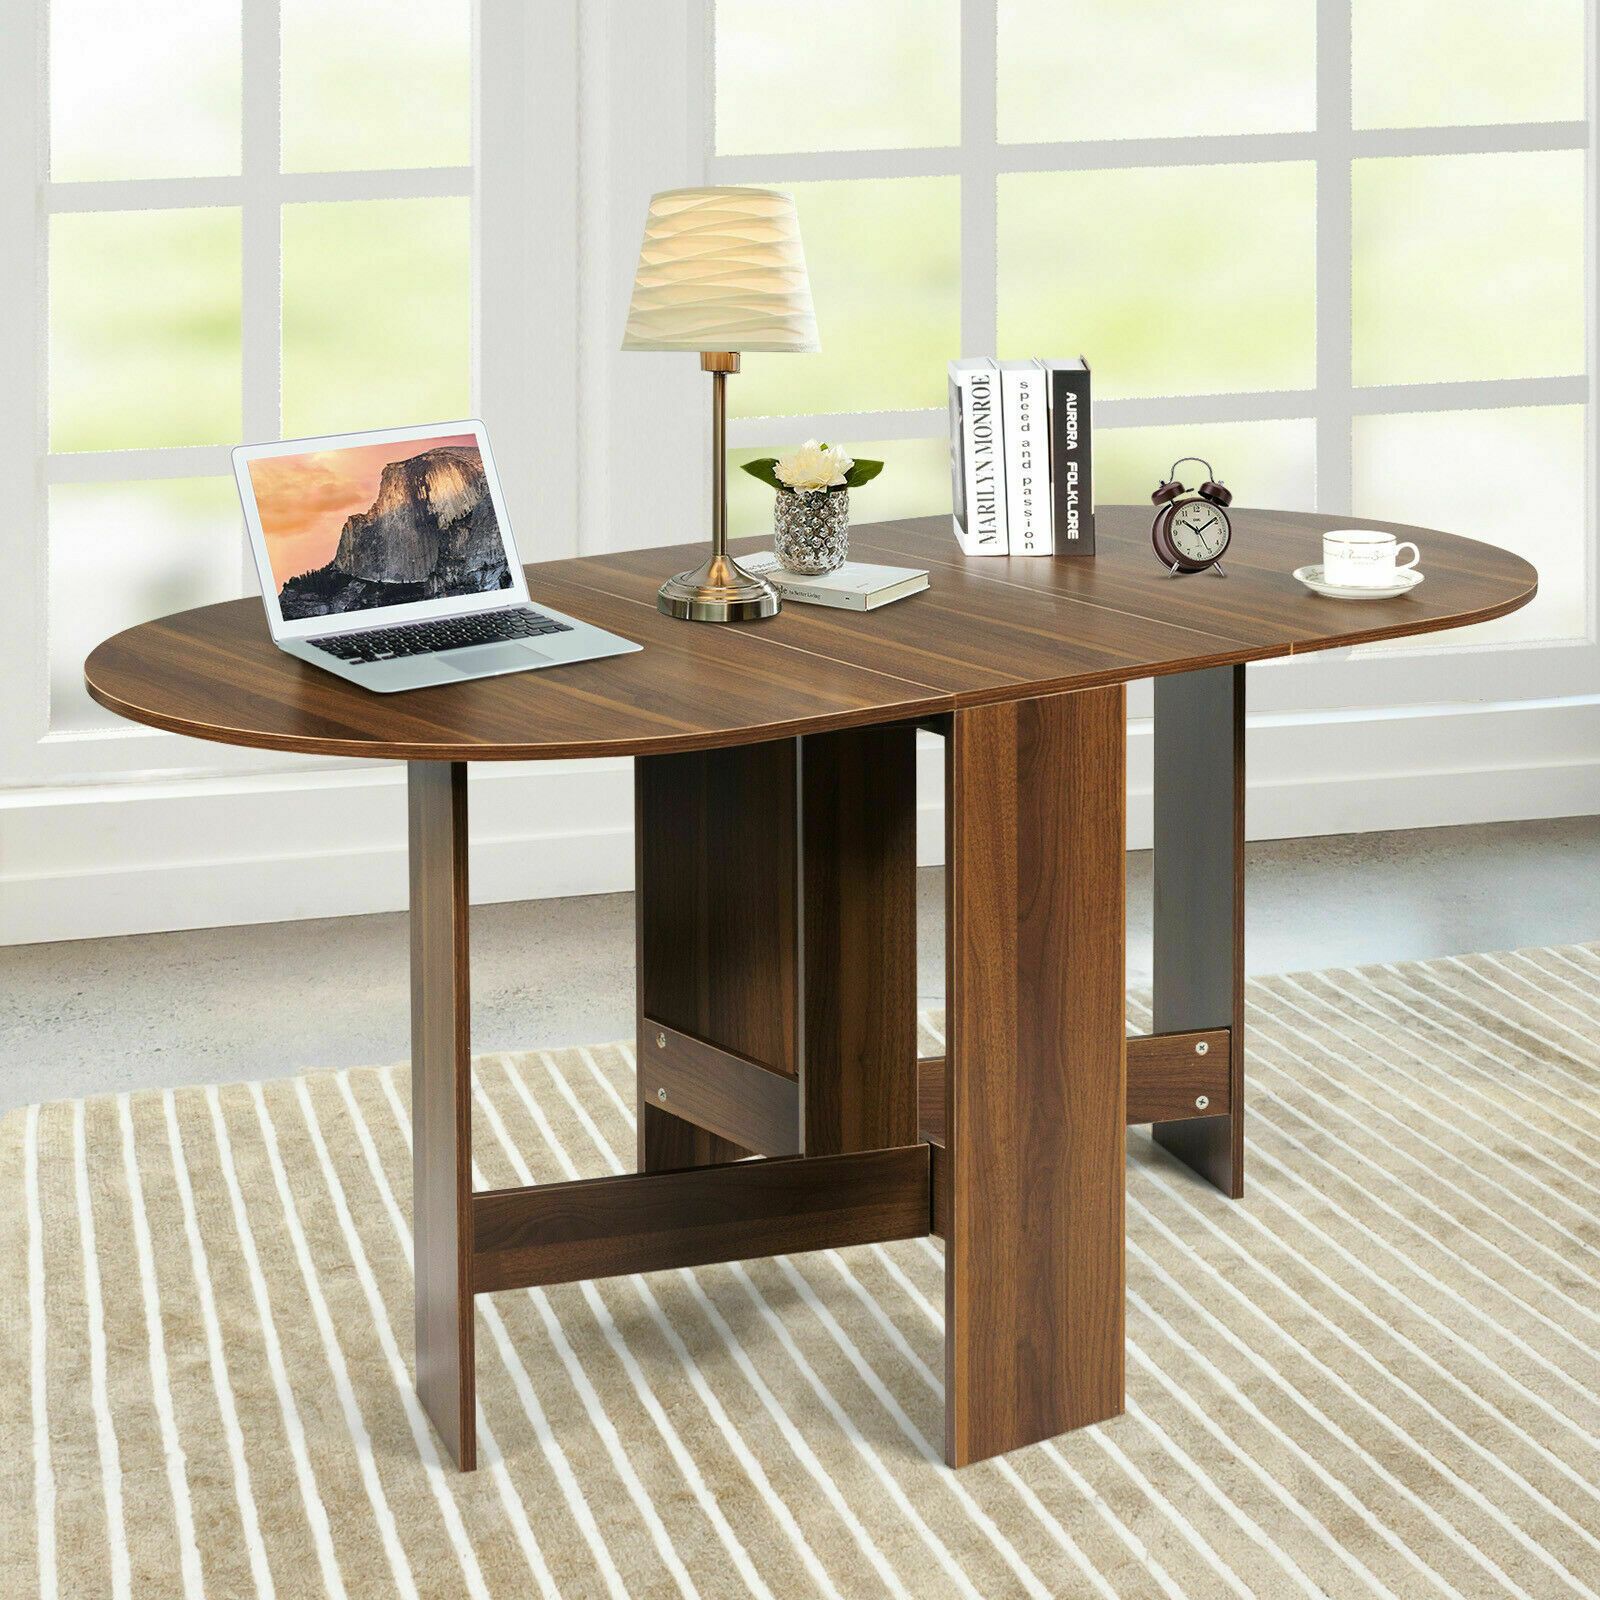 Folding Wooden Multifunctional Table